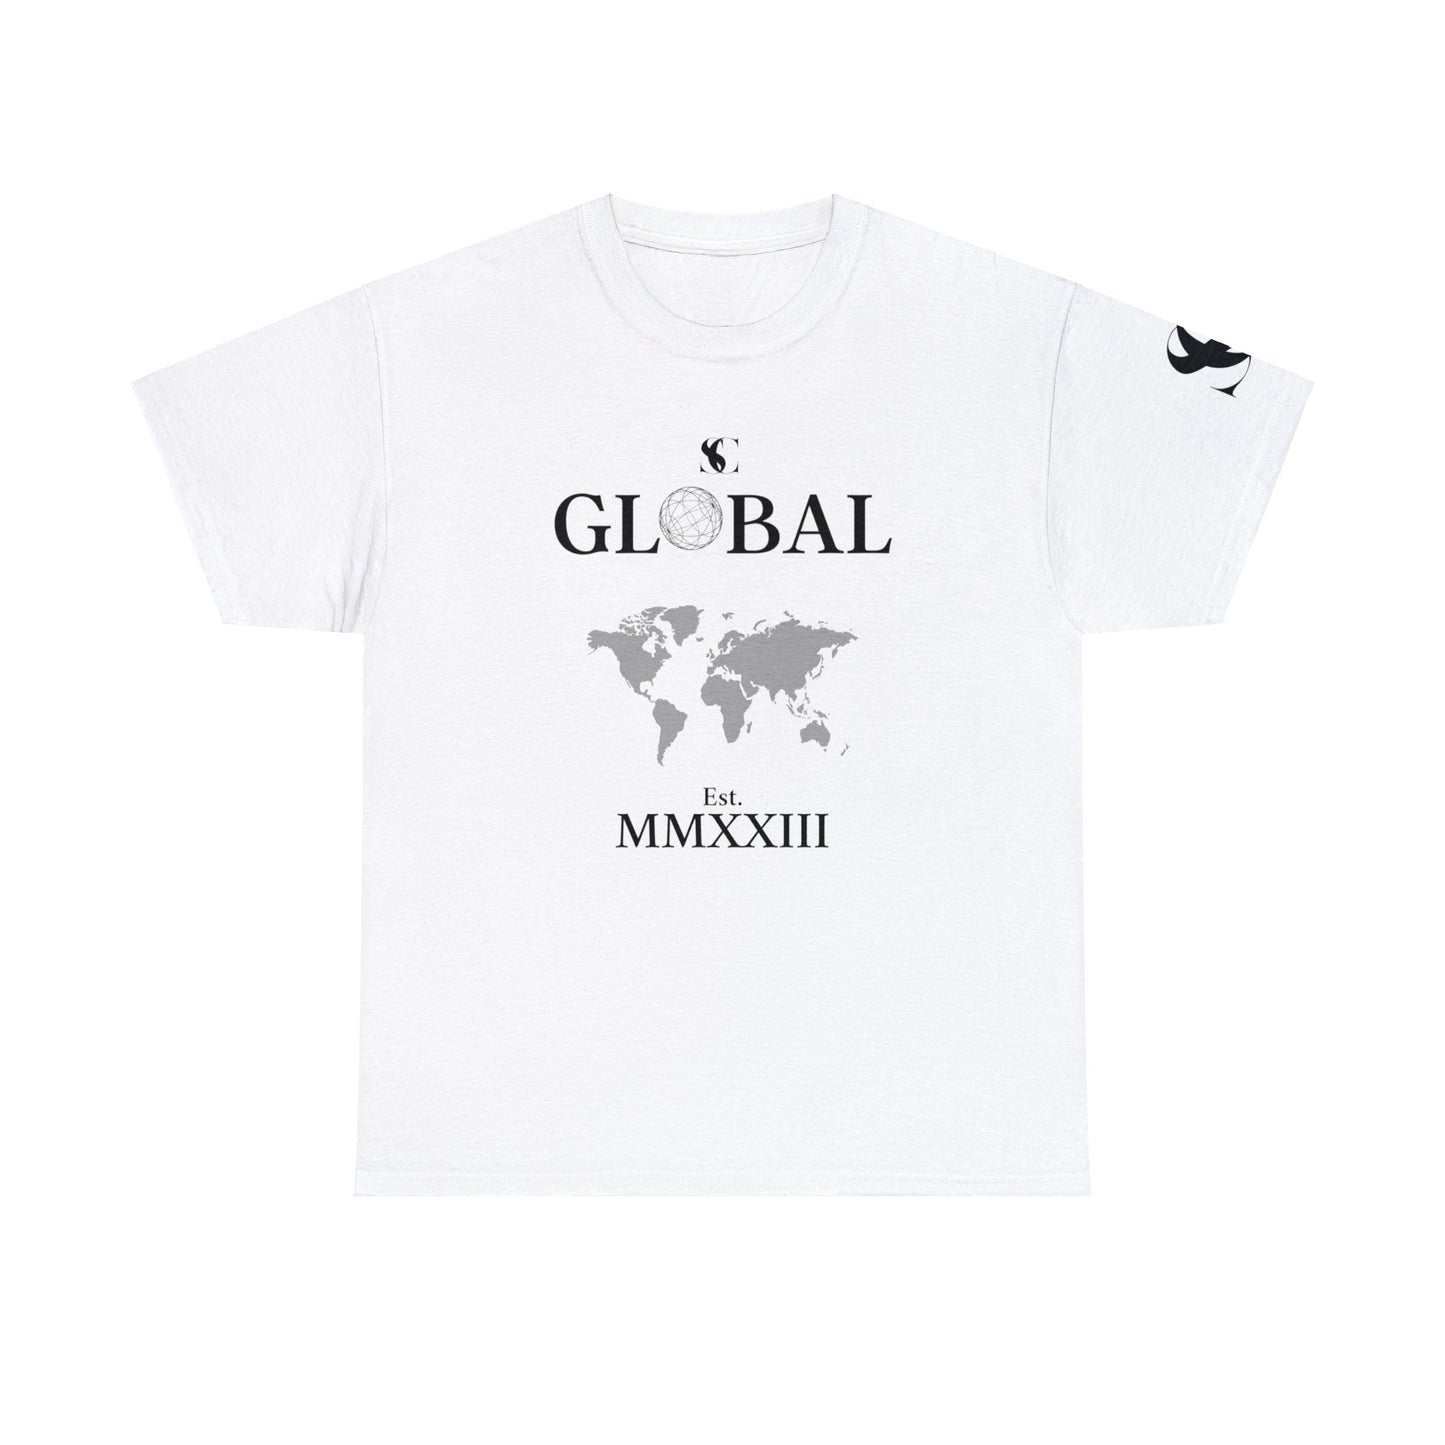 SC Exclusive global T-shirt